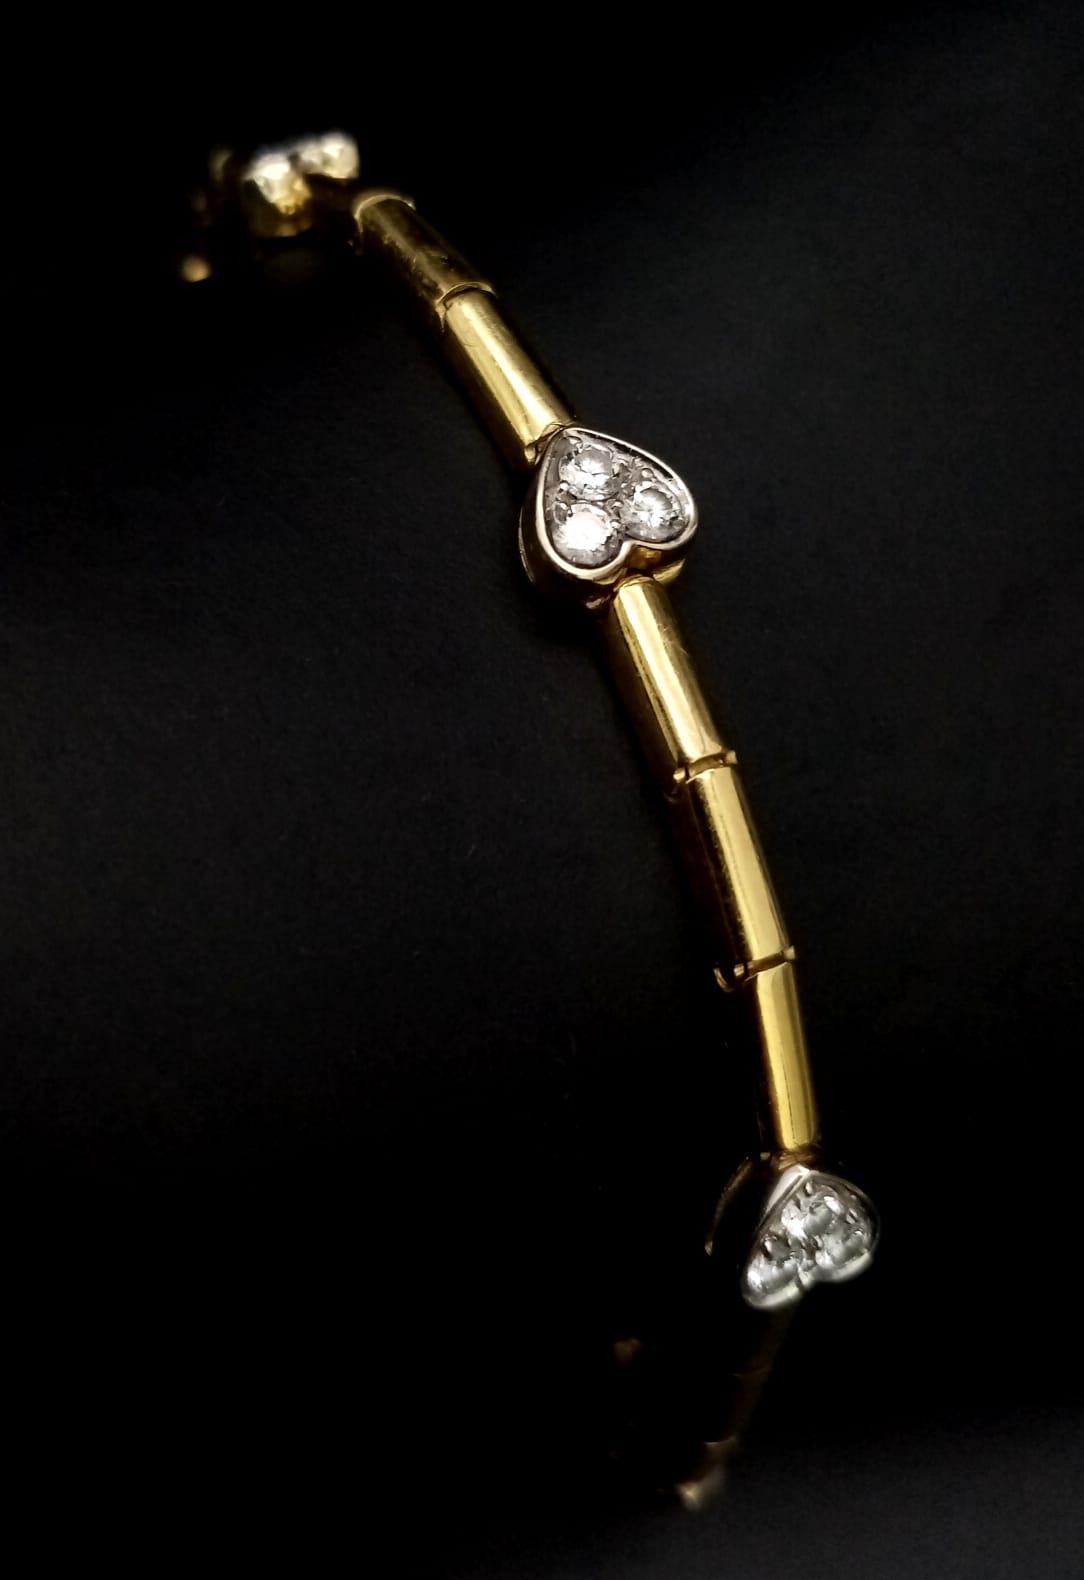 A Gorgeous 18K Gold and Heart-Diamond Necklace and Bracelet Set. The necklace is decorated with - Image 12 of 21